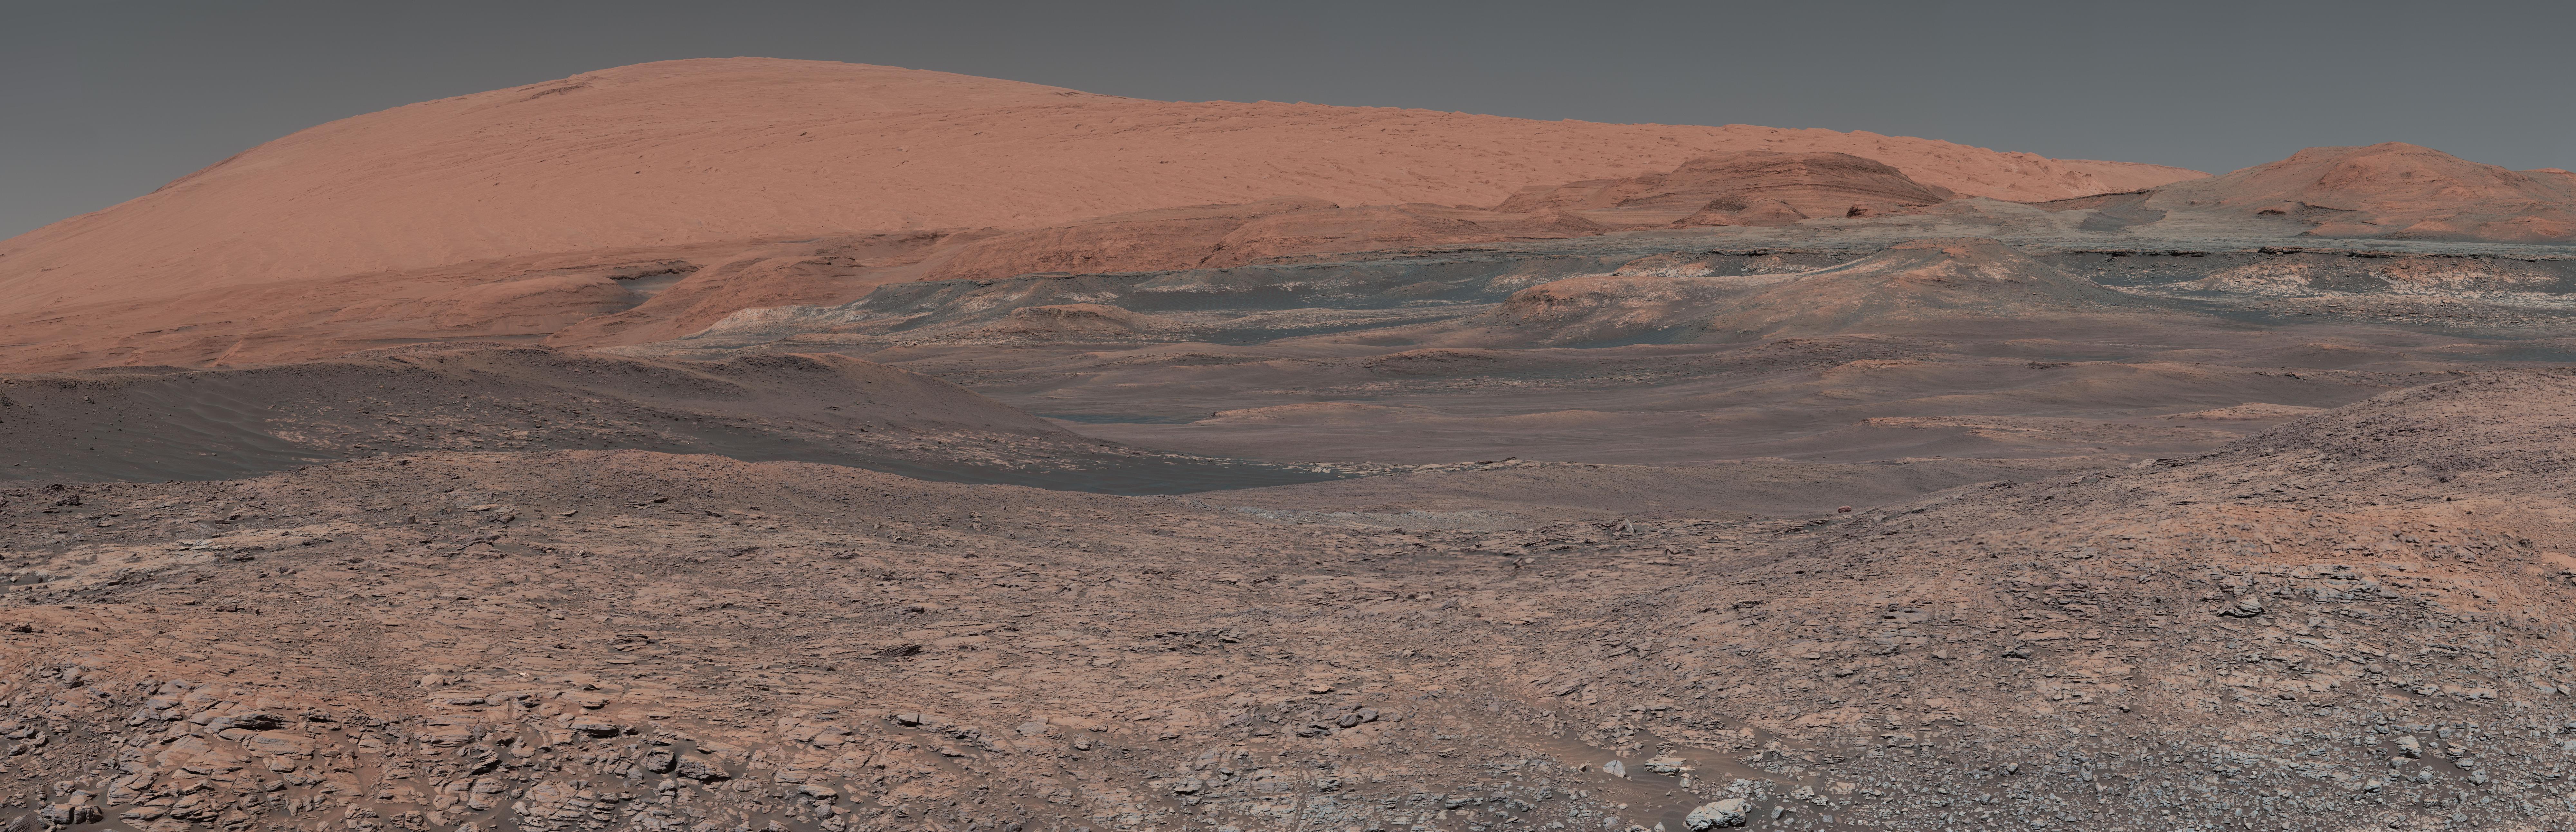 Mount Sharp photographed by Mars Curiosity rover in January 2018 © NASA/JPL-Caltech/MSSS